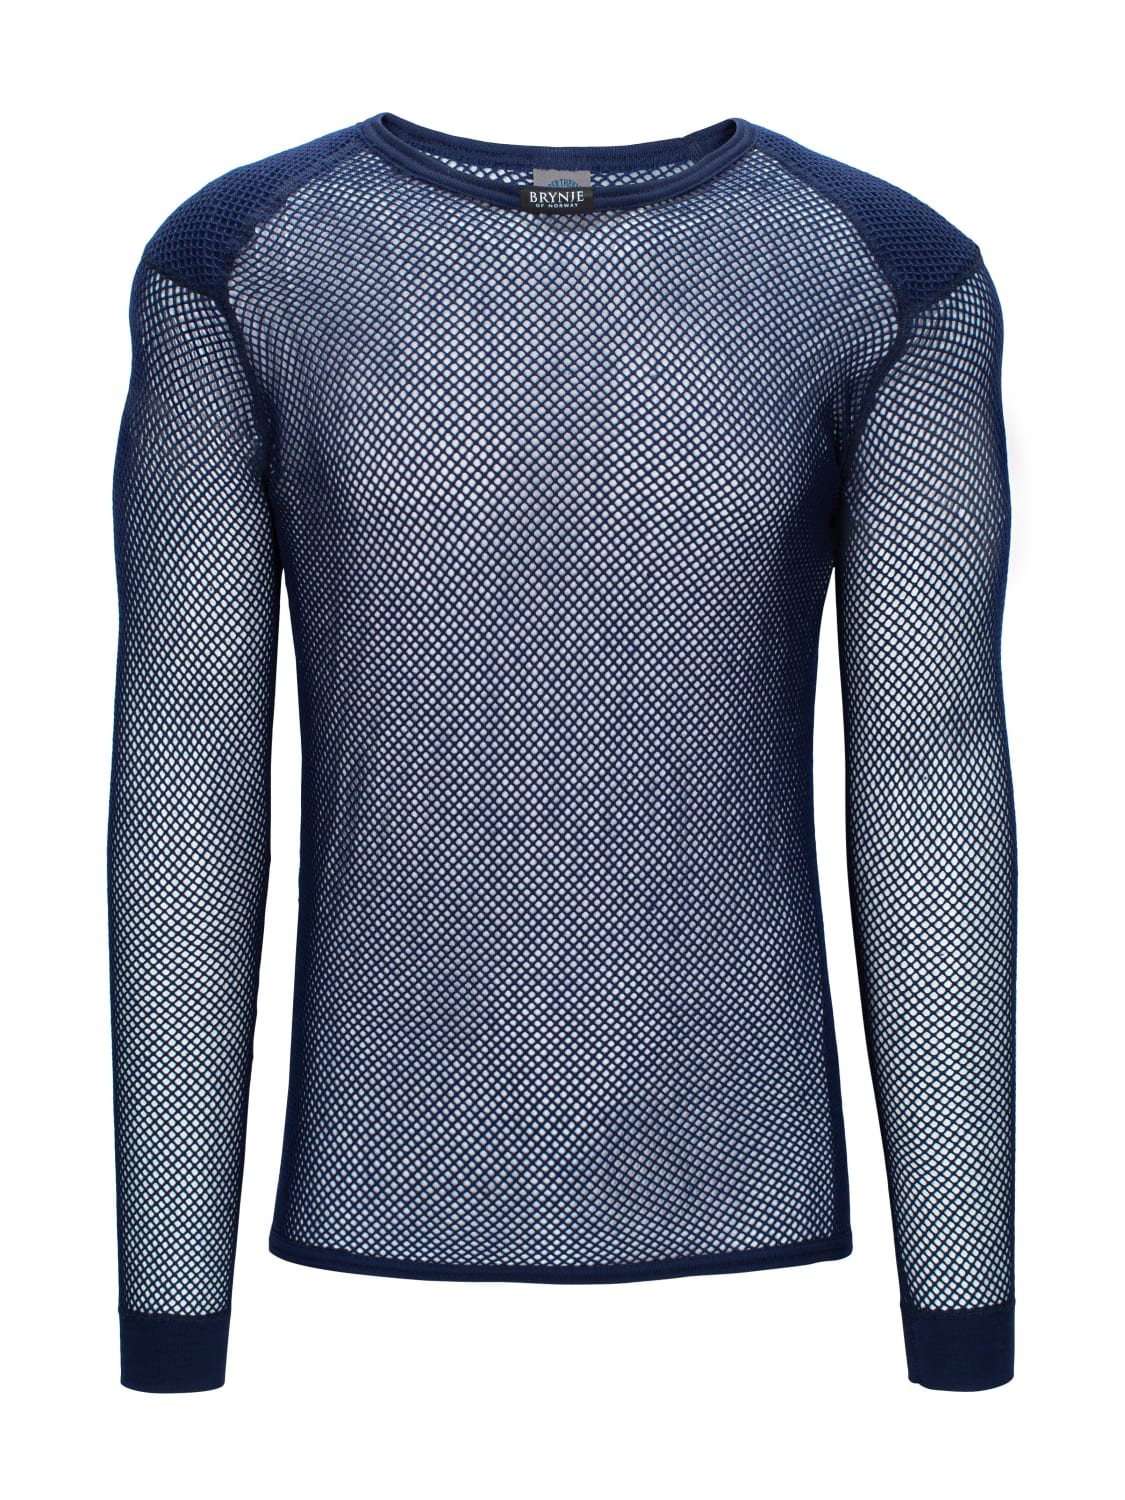 Super Thermo Shirt w/ shoulder panels